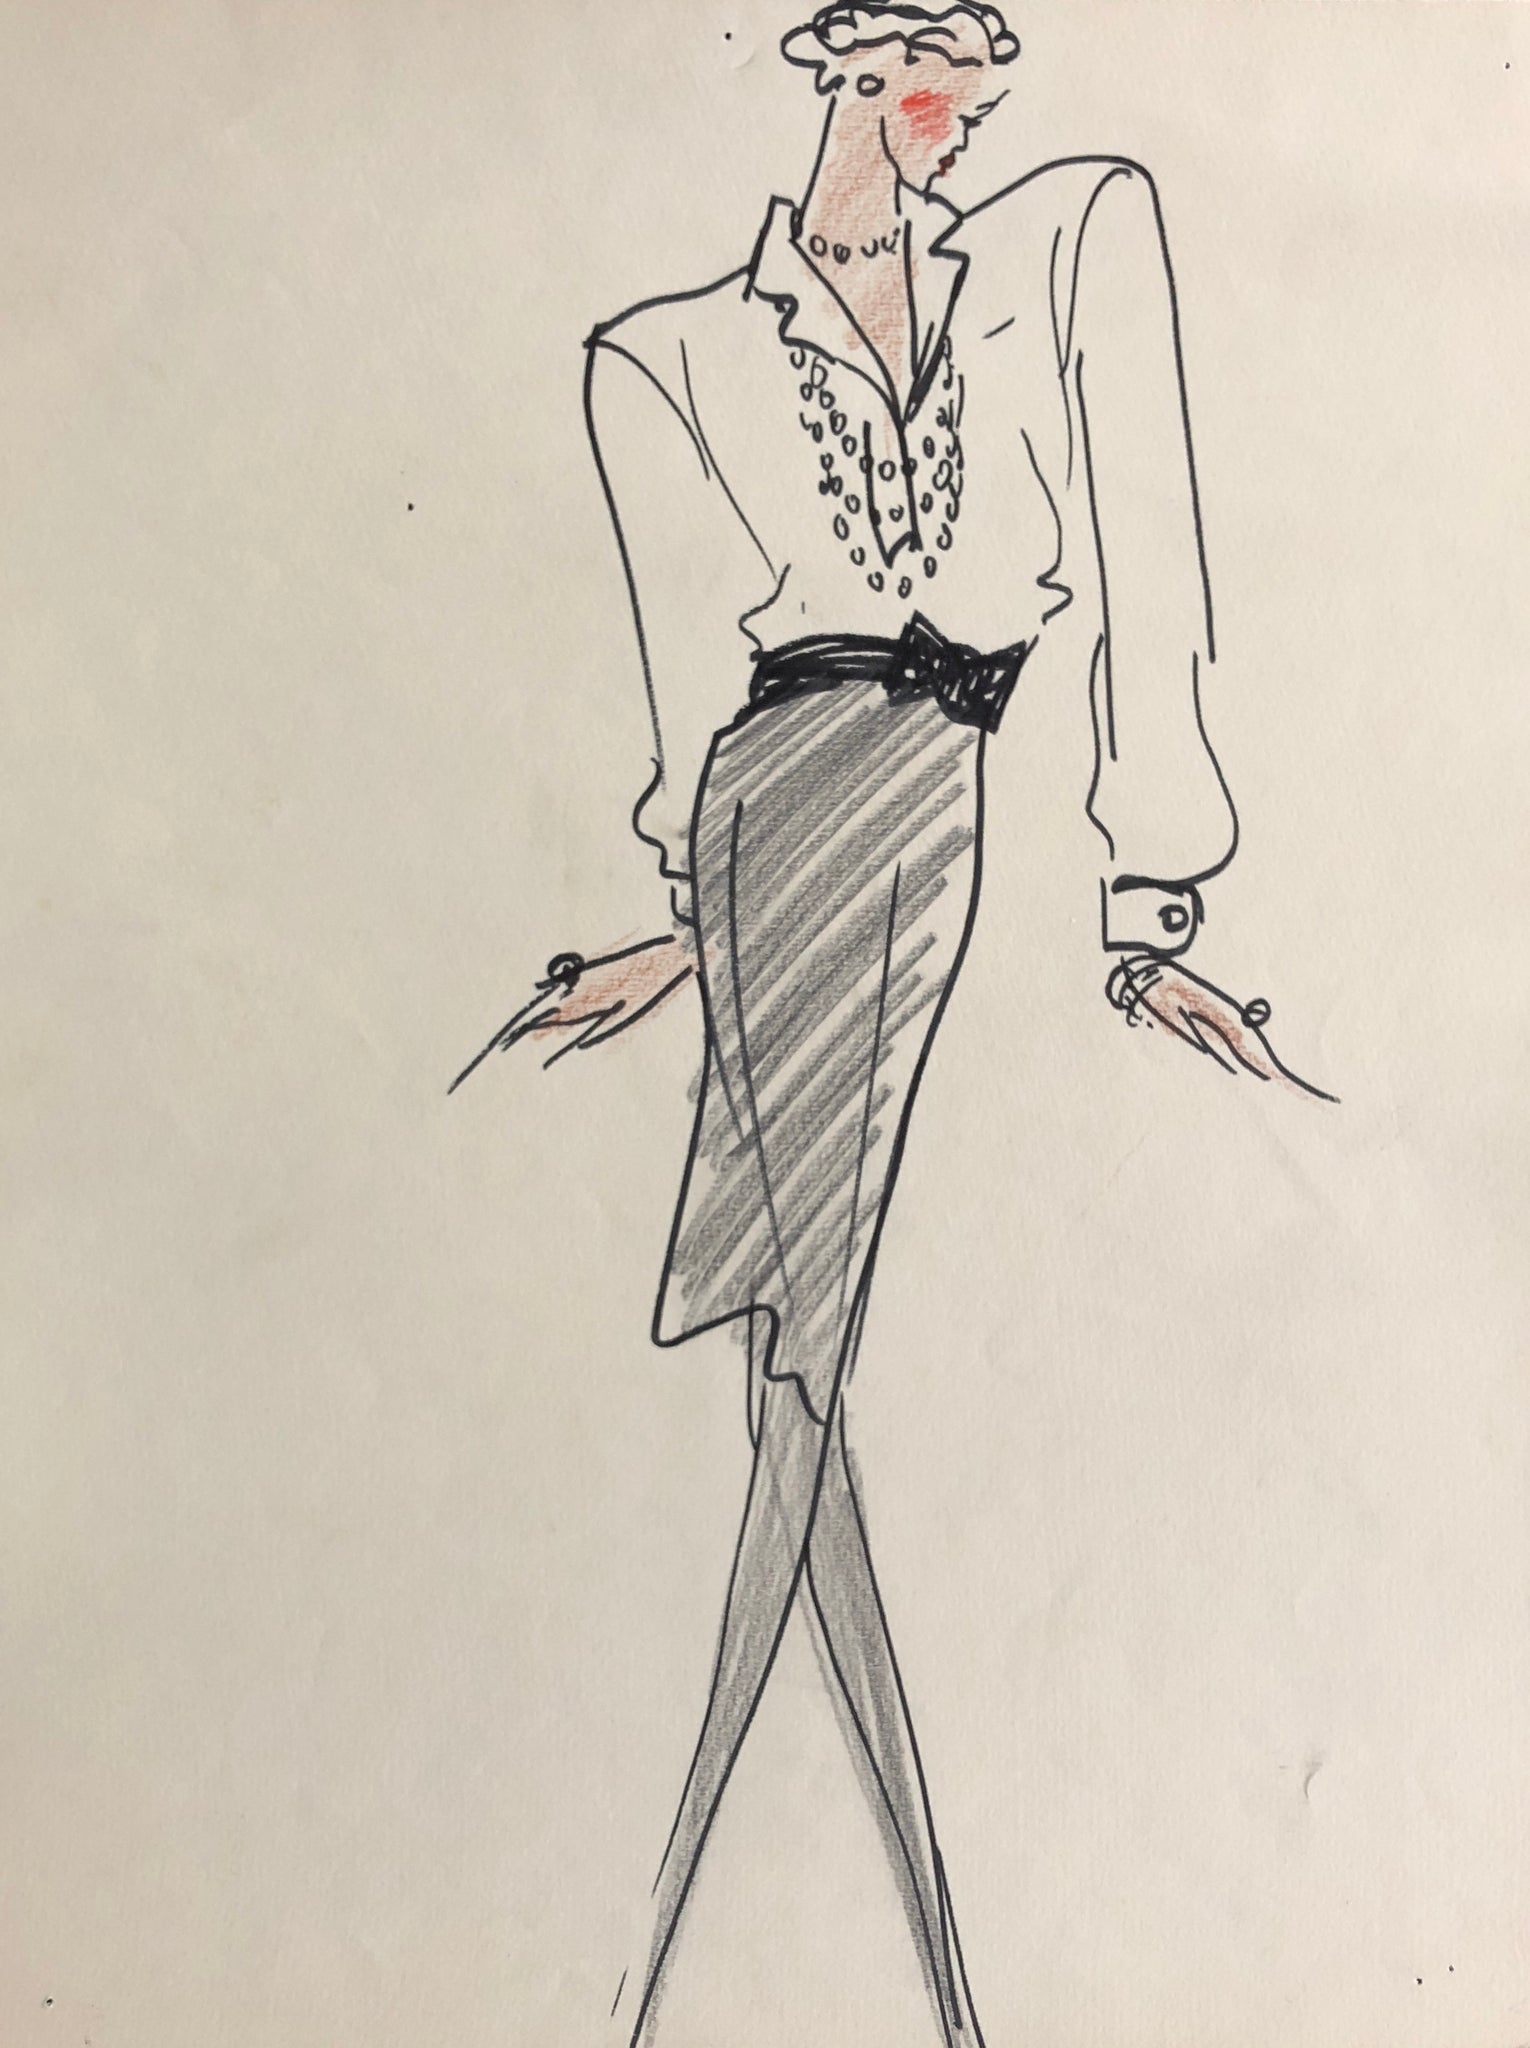 Saint Laurent, Yves. (1936–2008) How to modify an outfit: Collection of Original Fashion Drawings for an unpublished Mirabella feature